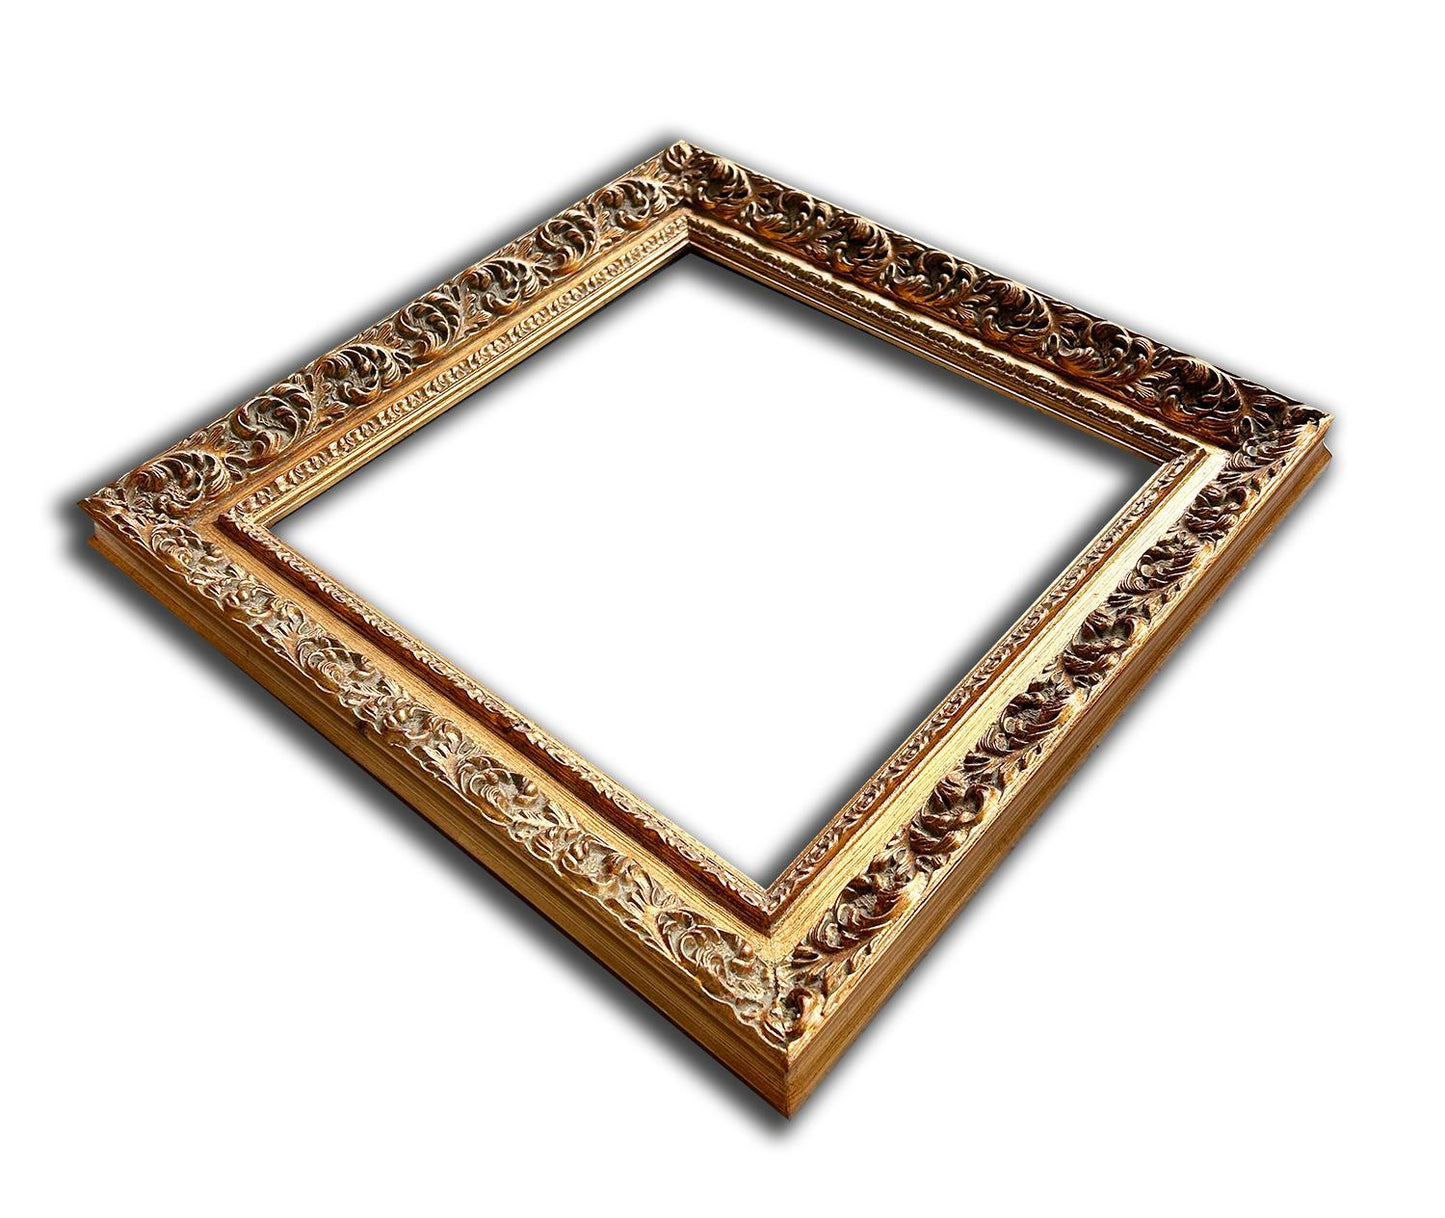 30x30 cm or 12x12 ins, wooden photo frame